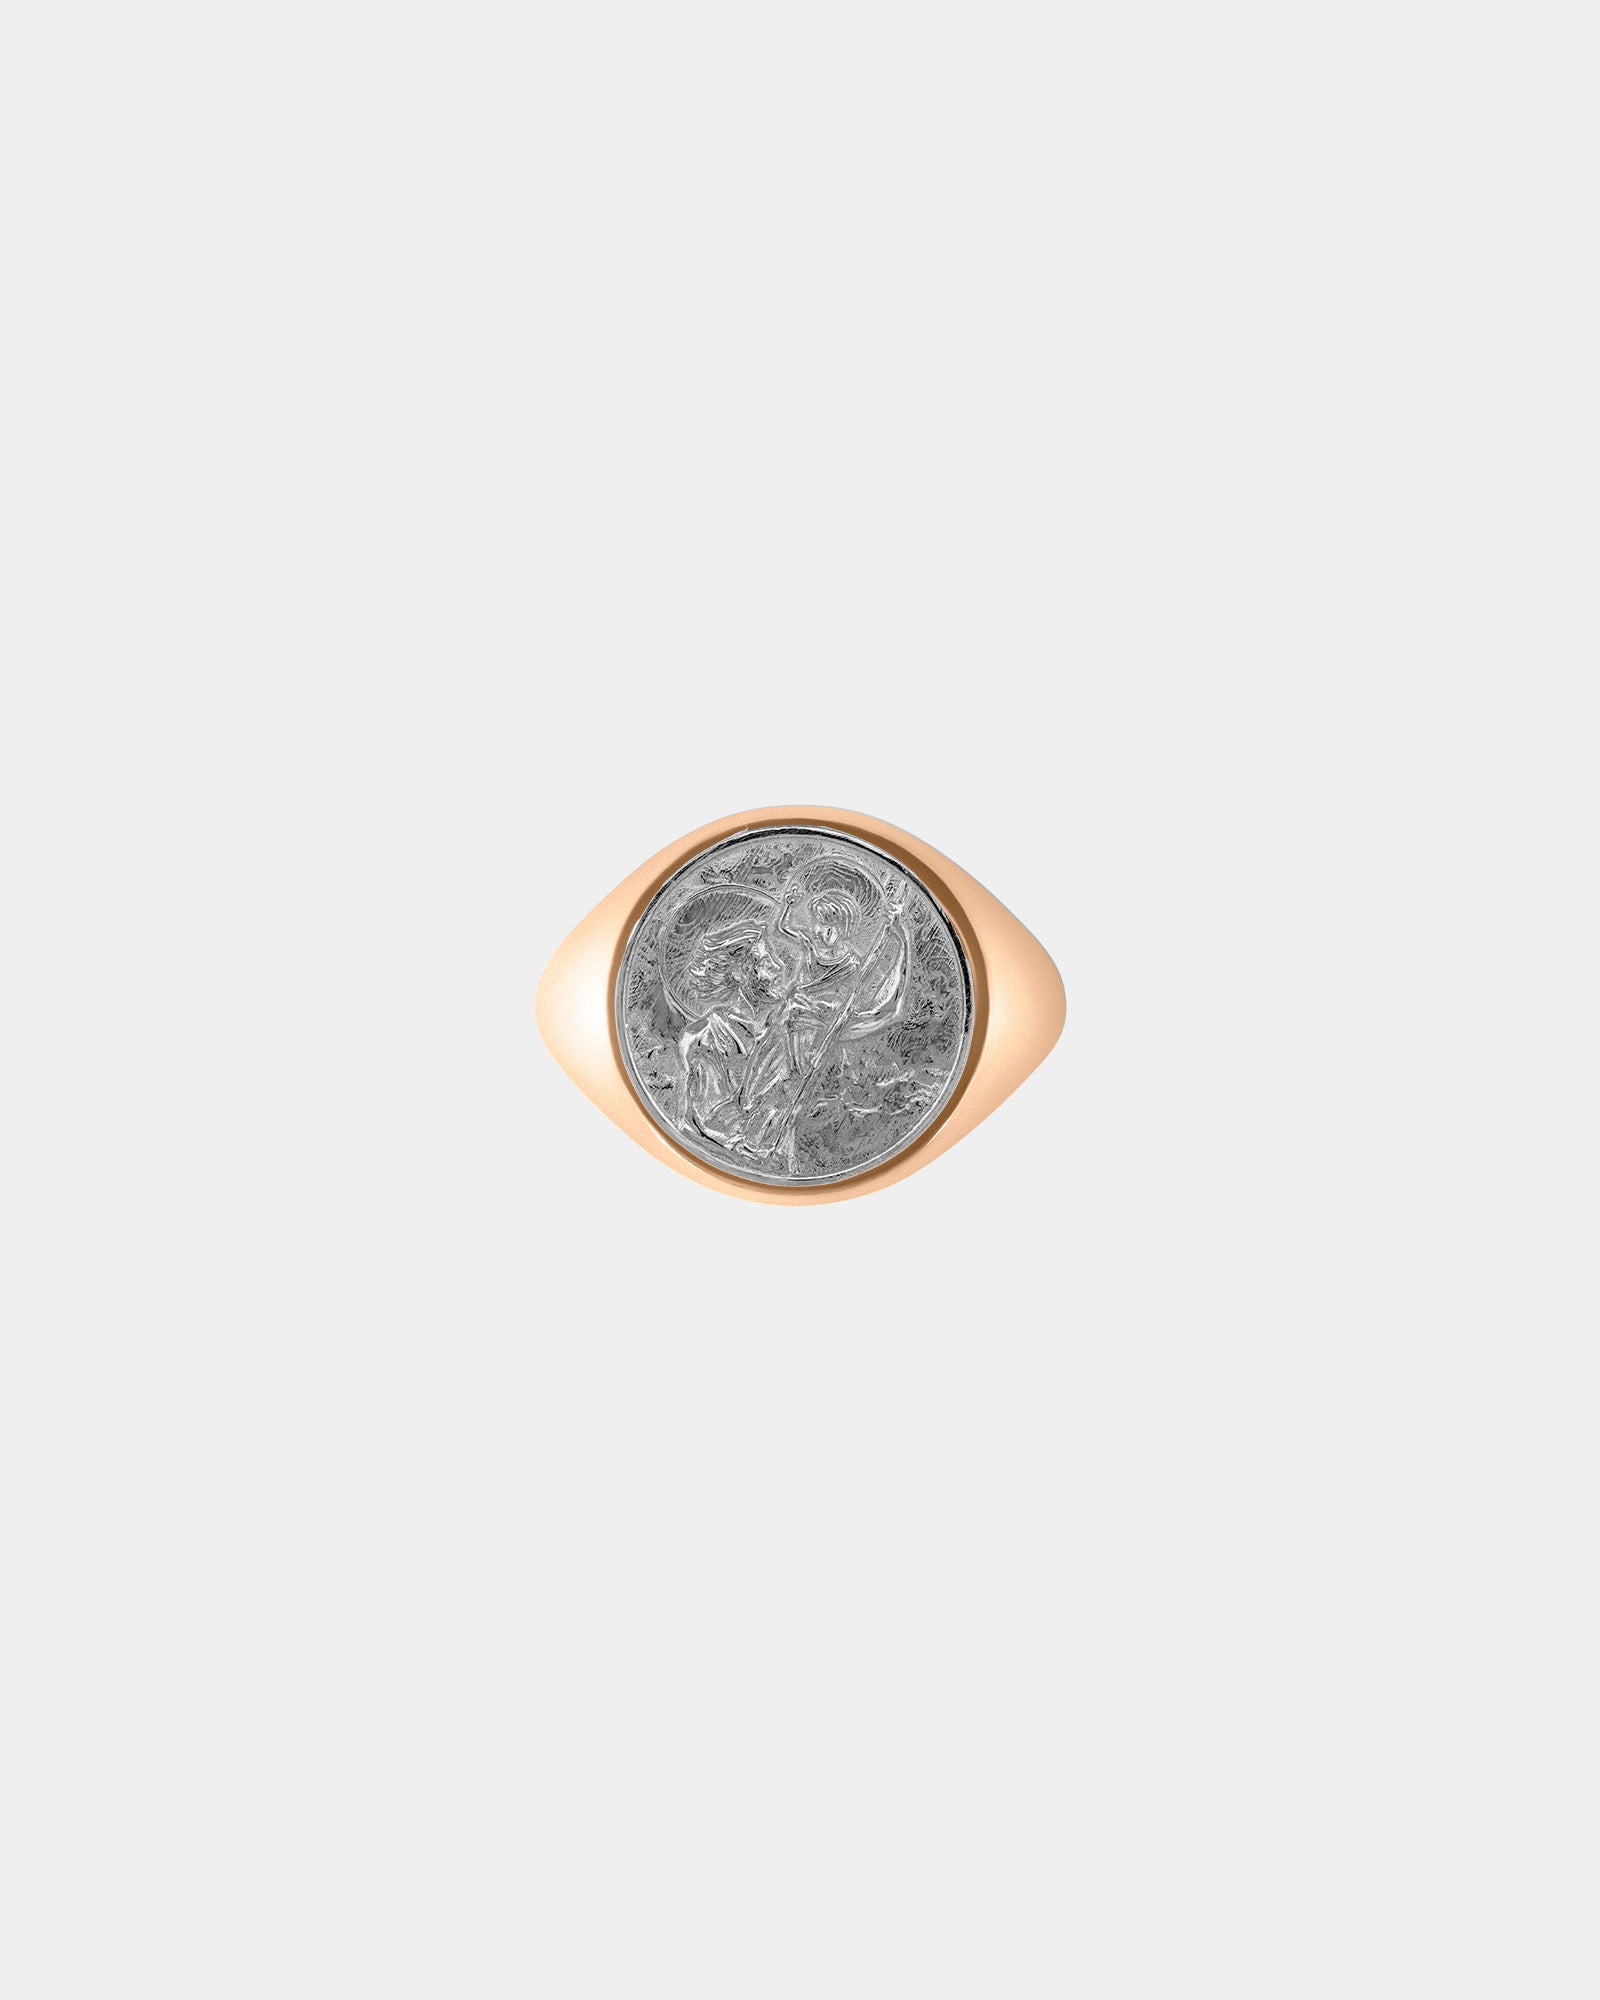 Large Saint Christopher Signet Ring in 9k Rose Gold / Sterling Silver by Wilson Grant